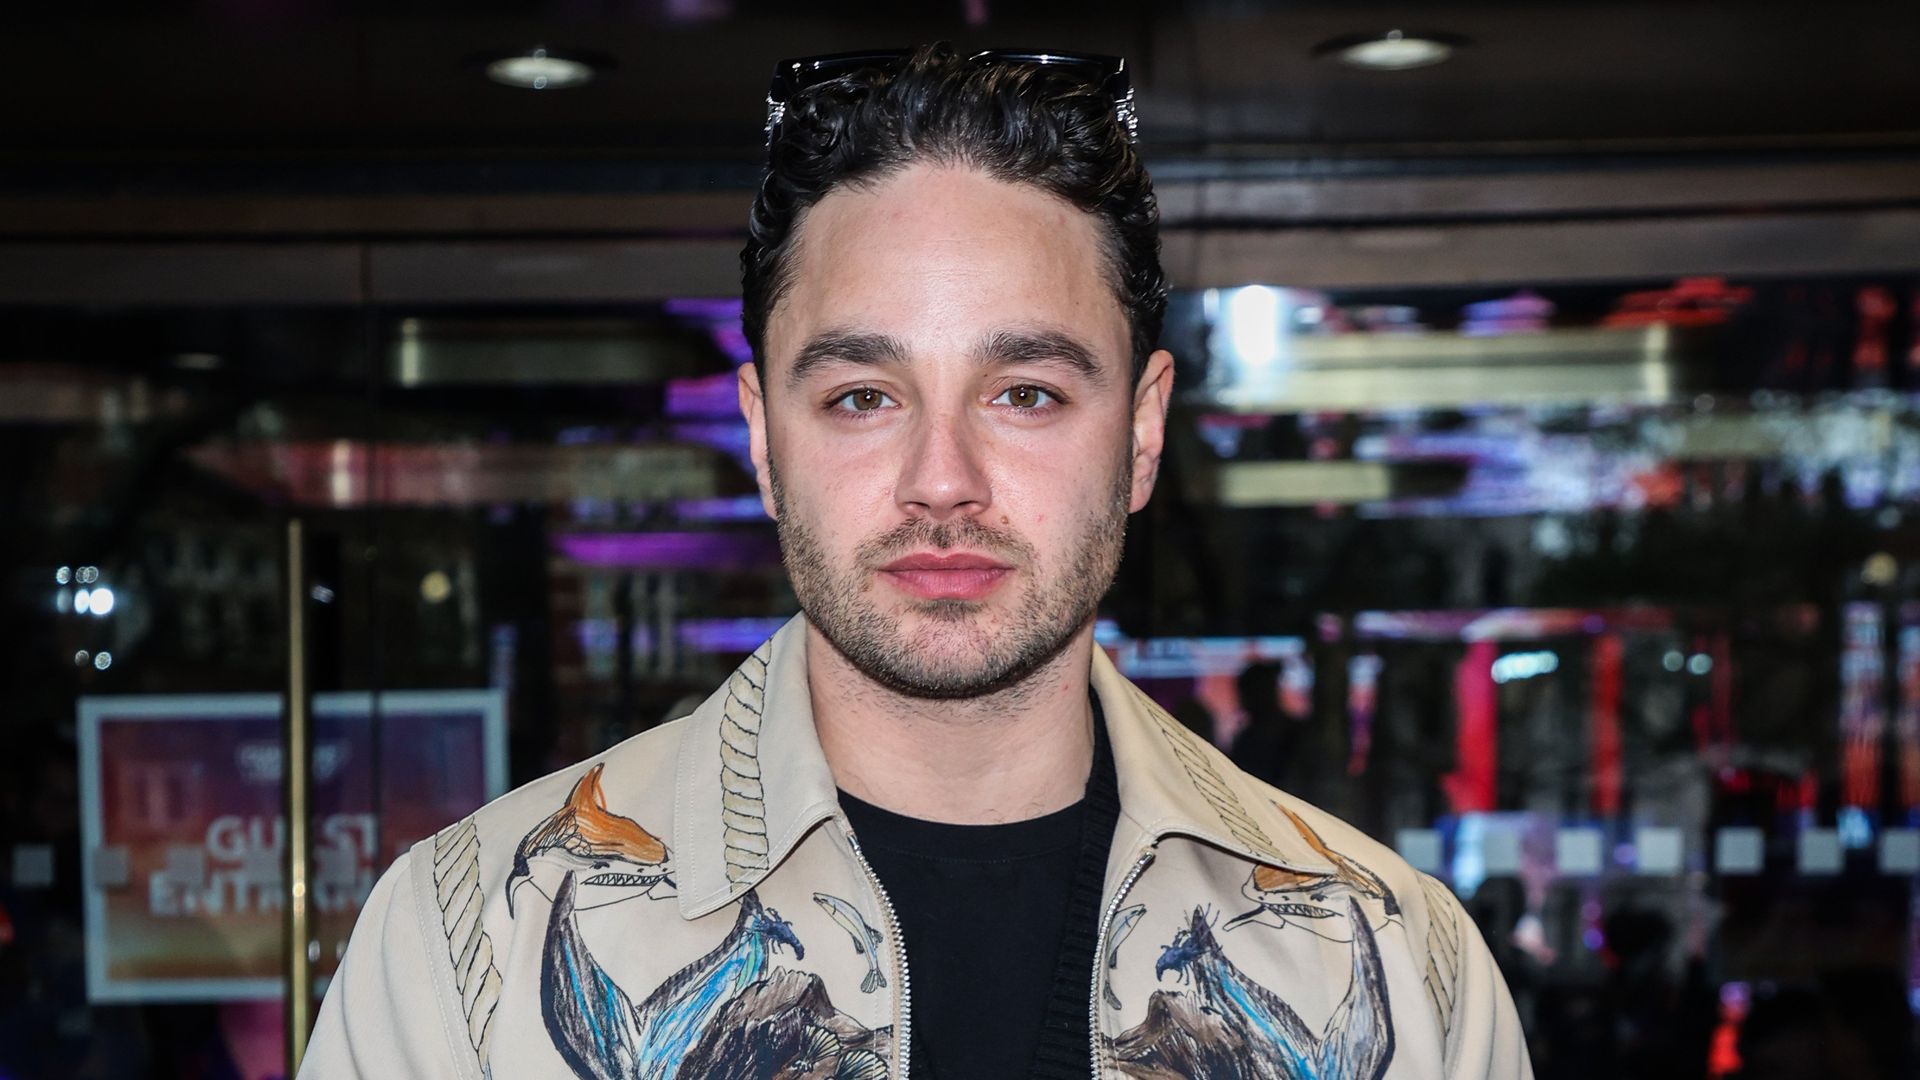 Adam Thomas looking serious at an event